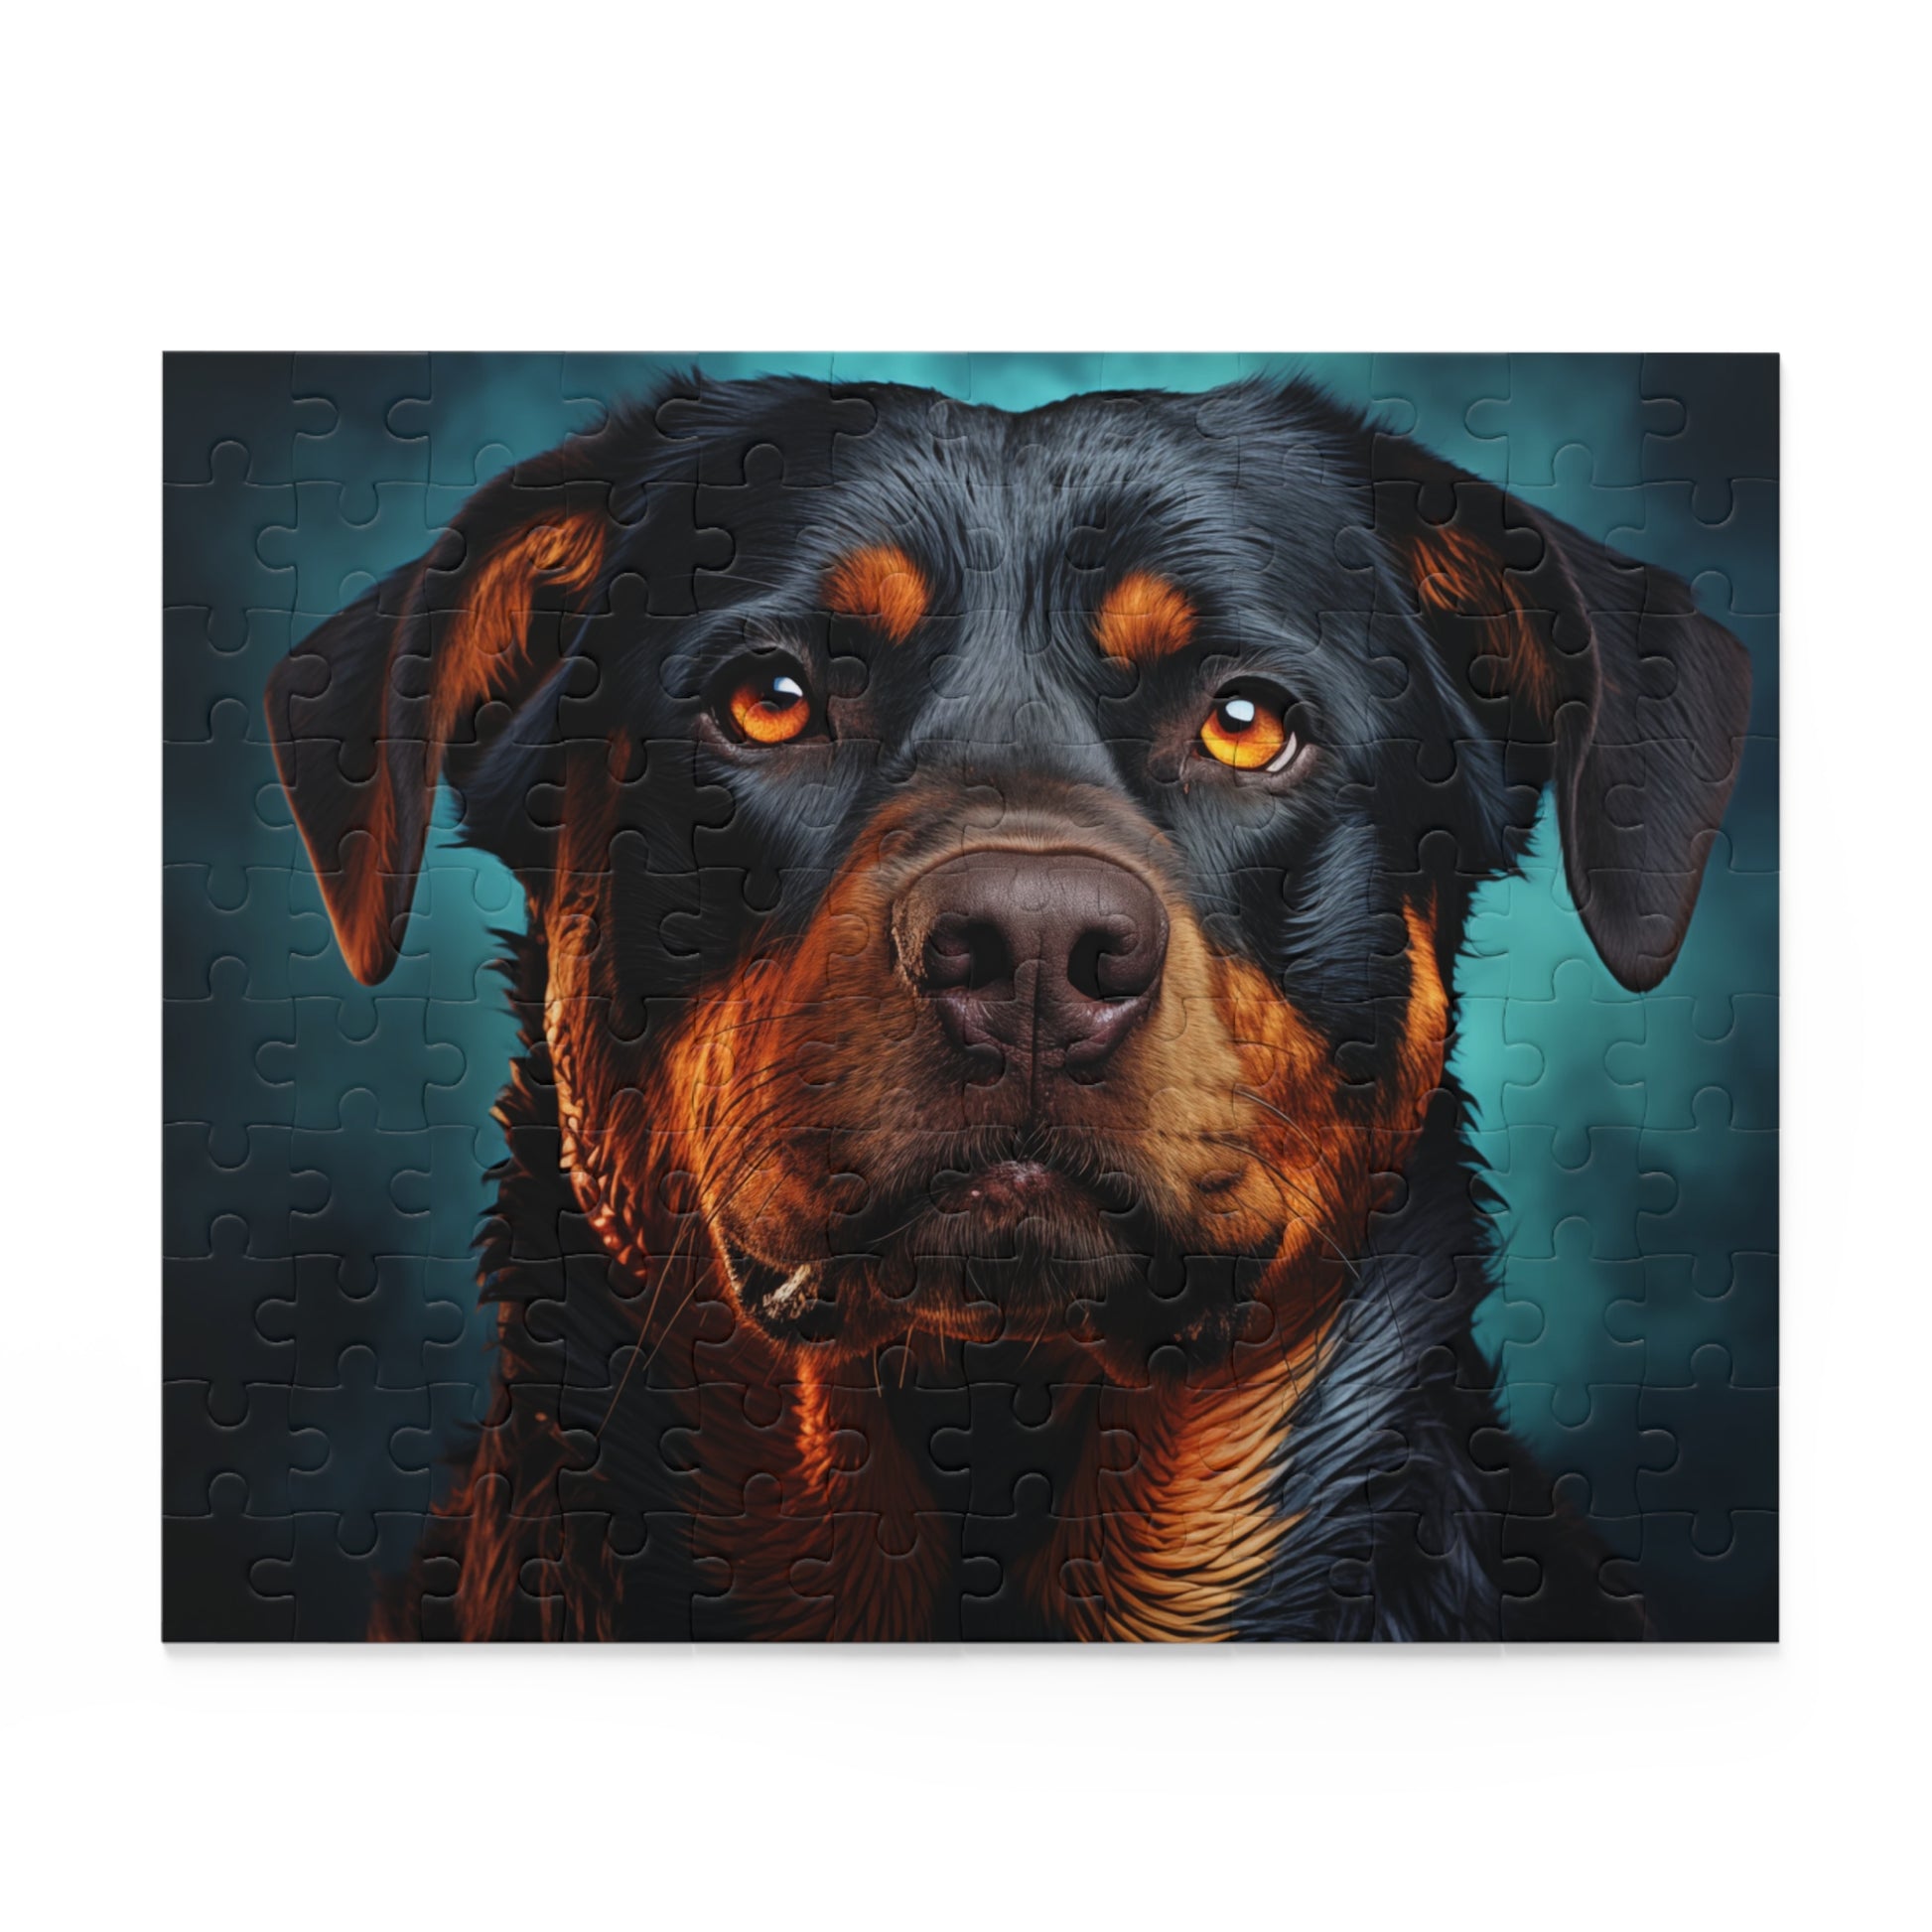 Watercolor Rottweiler Dog Jigsaw Puzzle Oil Paint for Boys, Girls, Kids Adult Birthday Business Jigsaw Puzzle Gift for Him Funny Humorous Indoor Outdoor Game Gift For Her Online-2